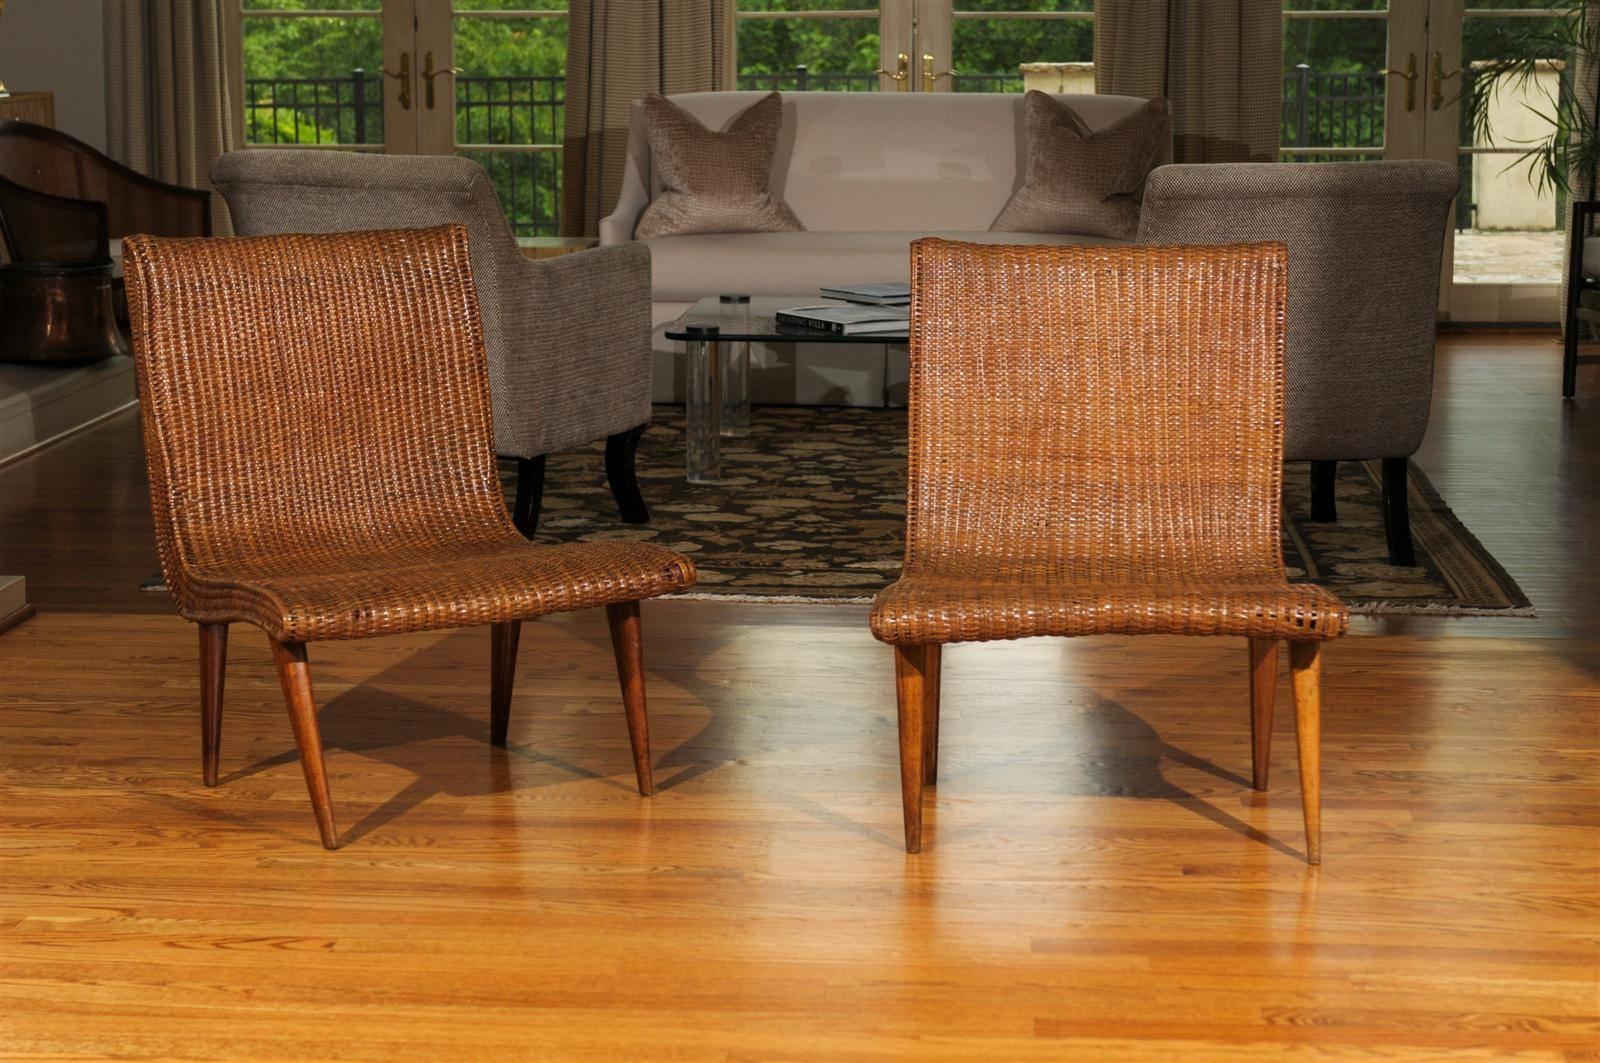 A beautiful and unusual pair of vintage slipper loungers, circa 1945. Expertly crafted mahogany frame covered in wicker. Exquisite pieces mellowed to absolute perfection. Fabulous! Excellent restored condition. The chairs have been professionally